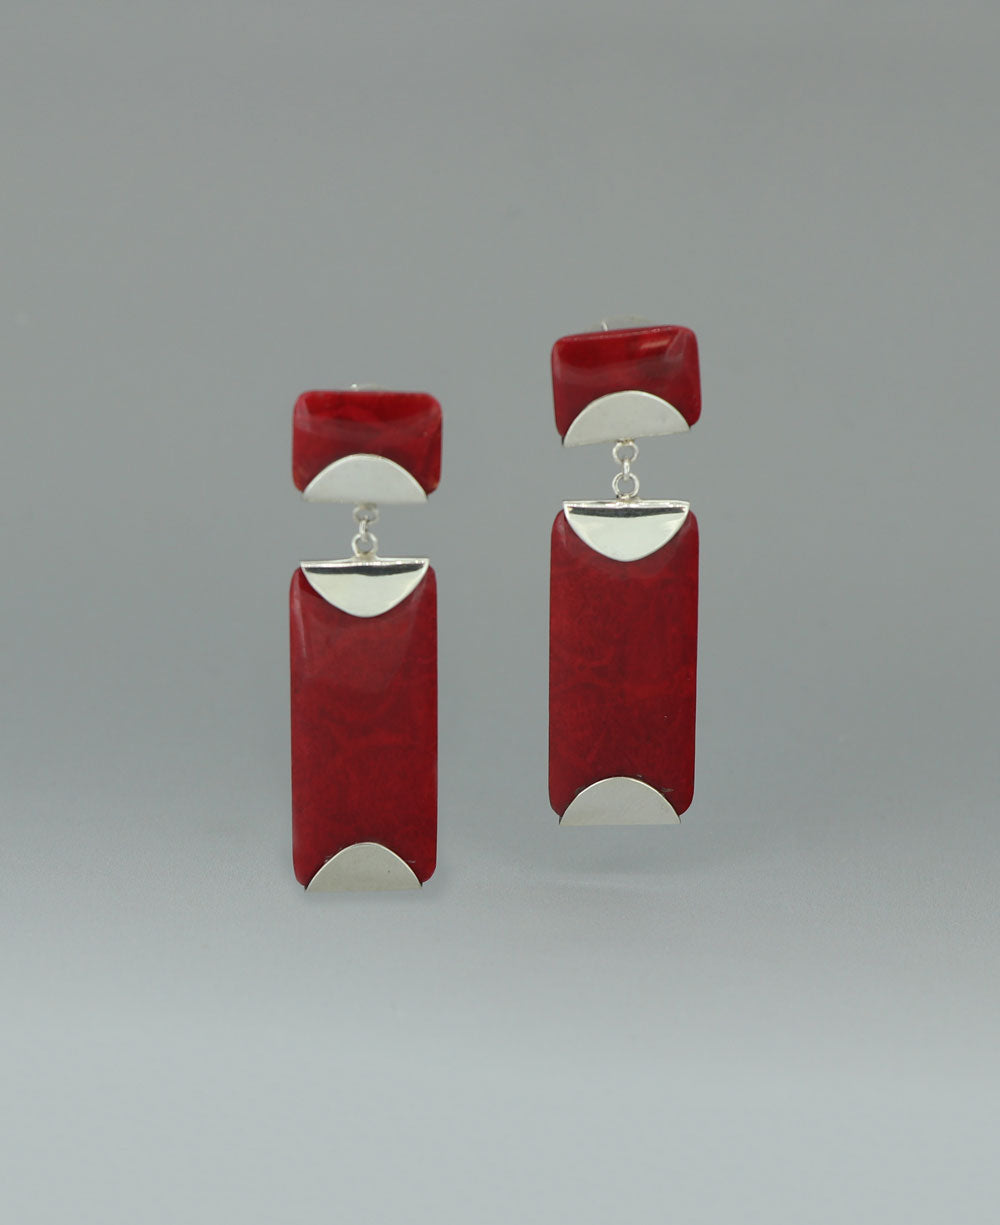 Close-up image of the sterling silver Red Coral earrings